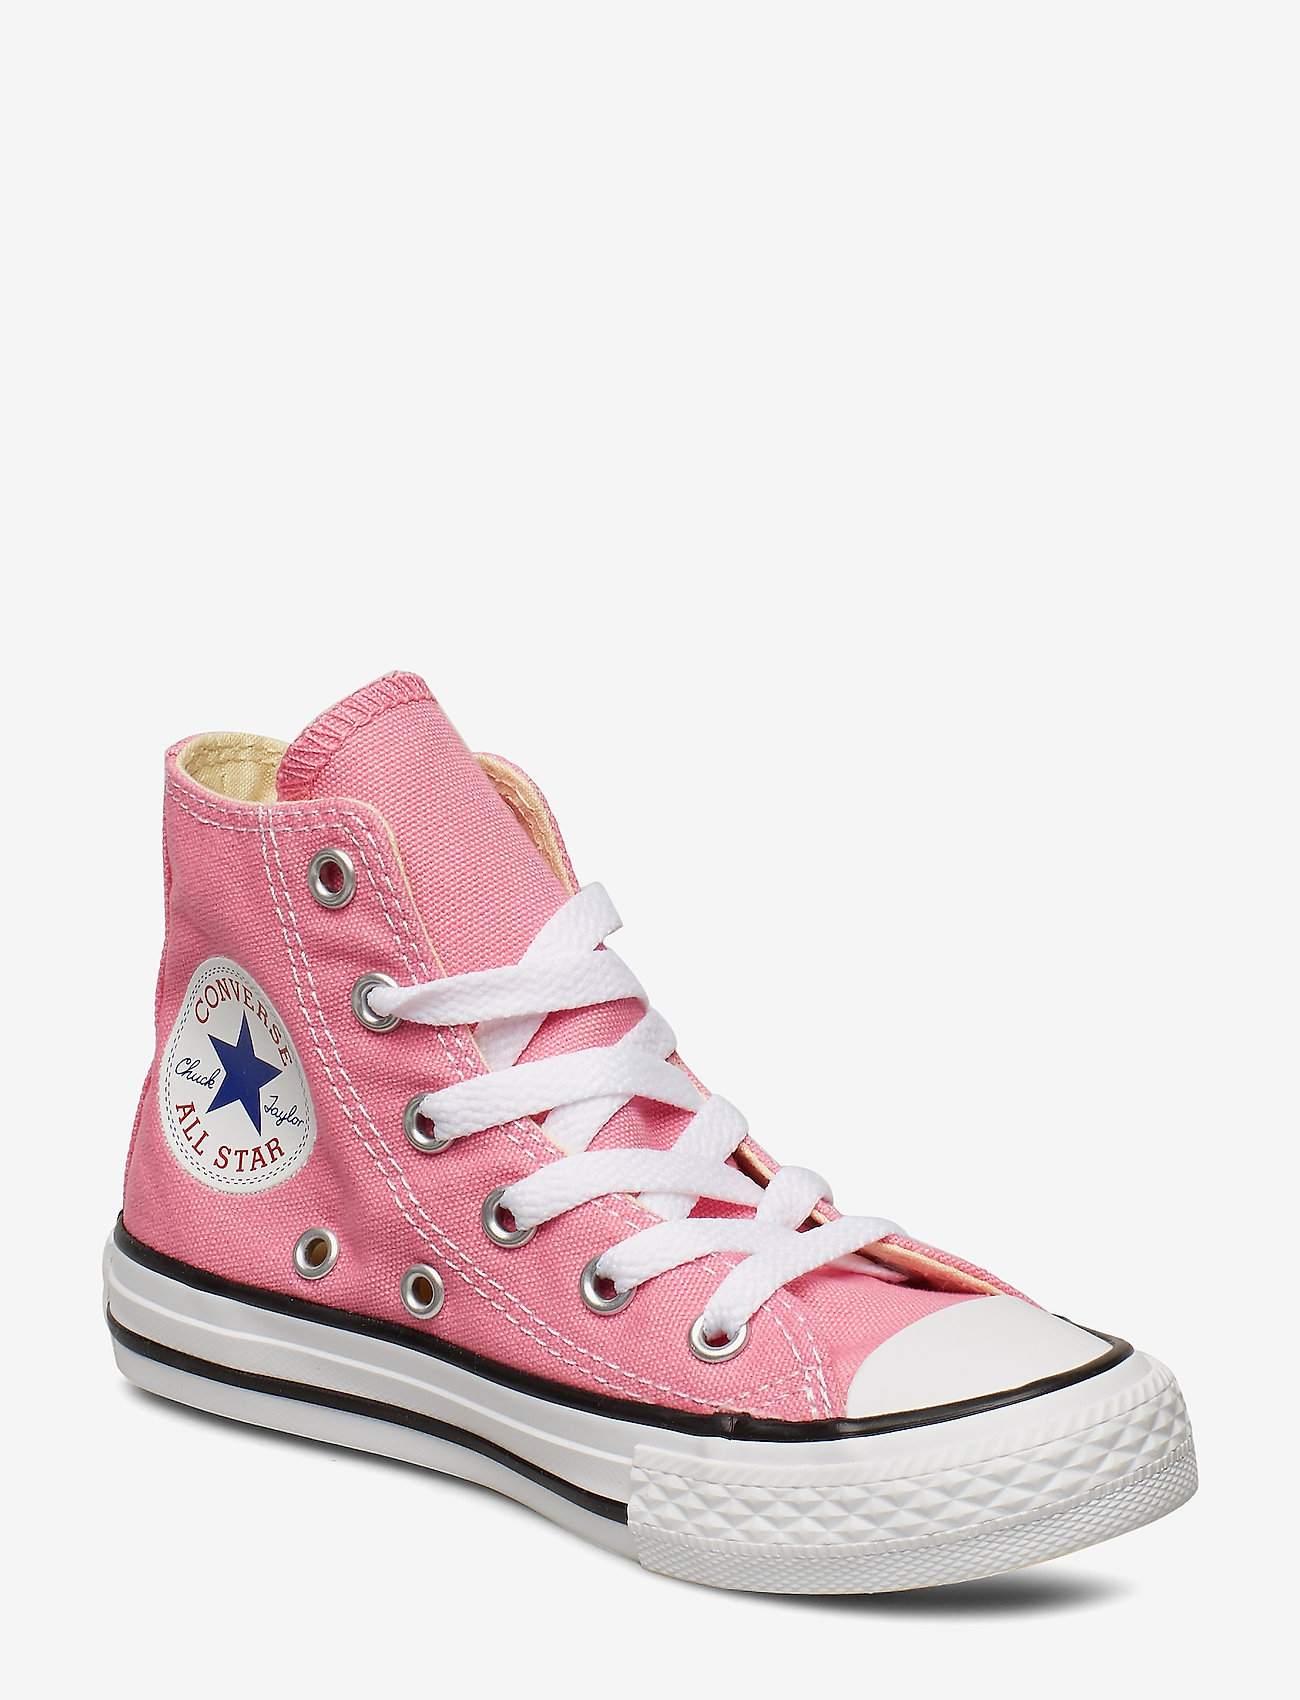 Converse - Chuck Taylor All Star - lapset - pink - 0